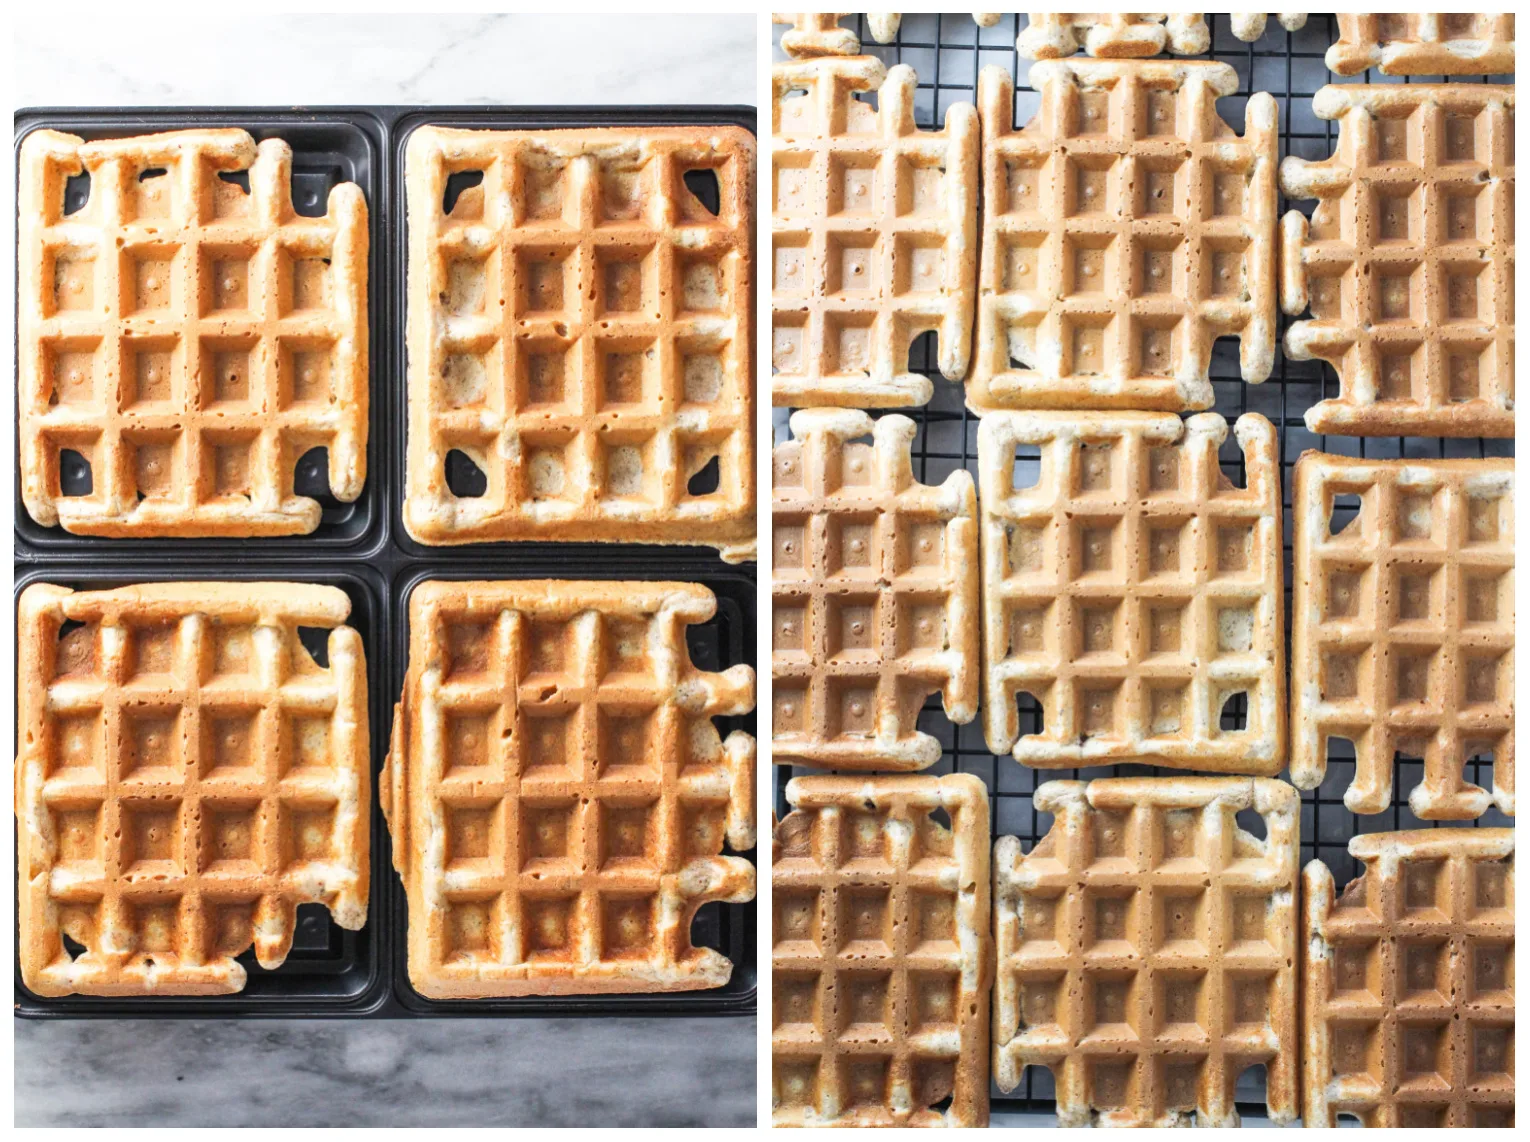 Two side by side pictures with waffles. In the picture on the left, the waffles are on the griddle of an waffle maker. In the picture on the right, the waffles are on a cooling rack.